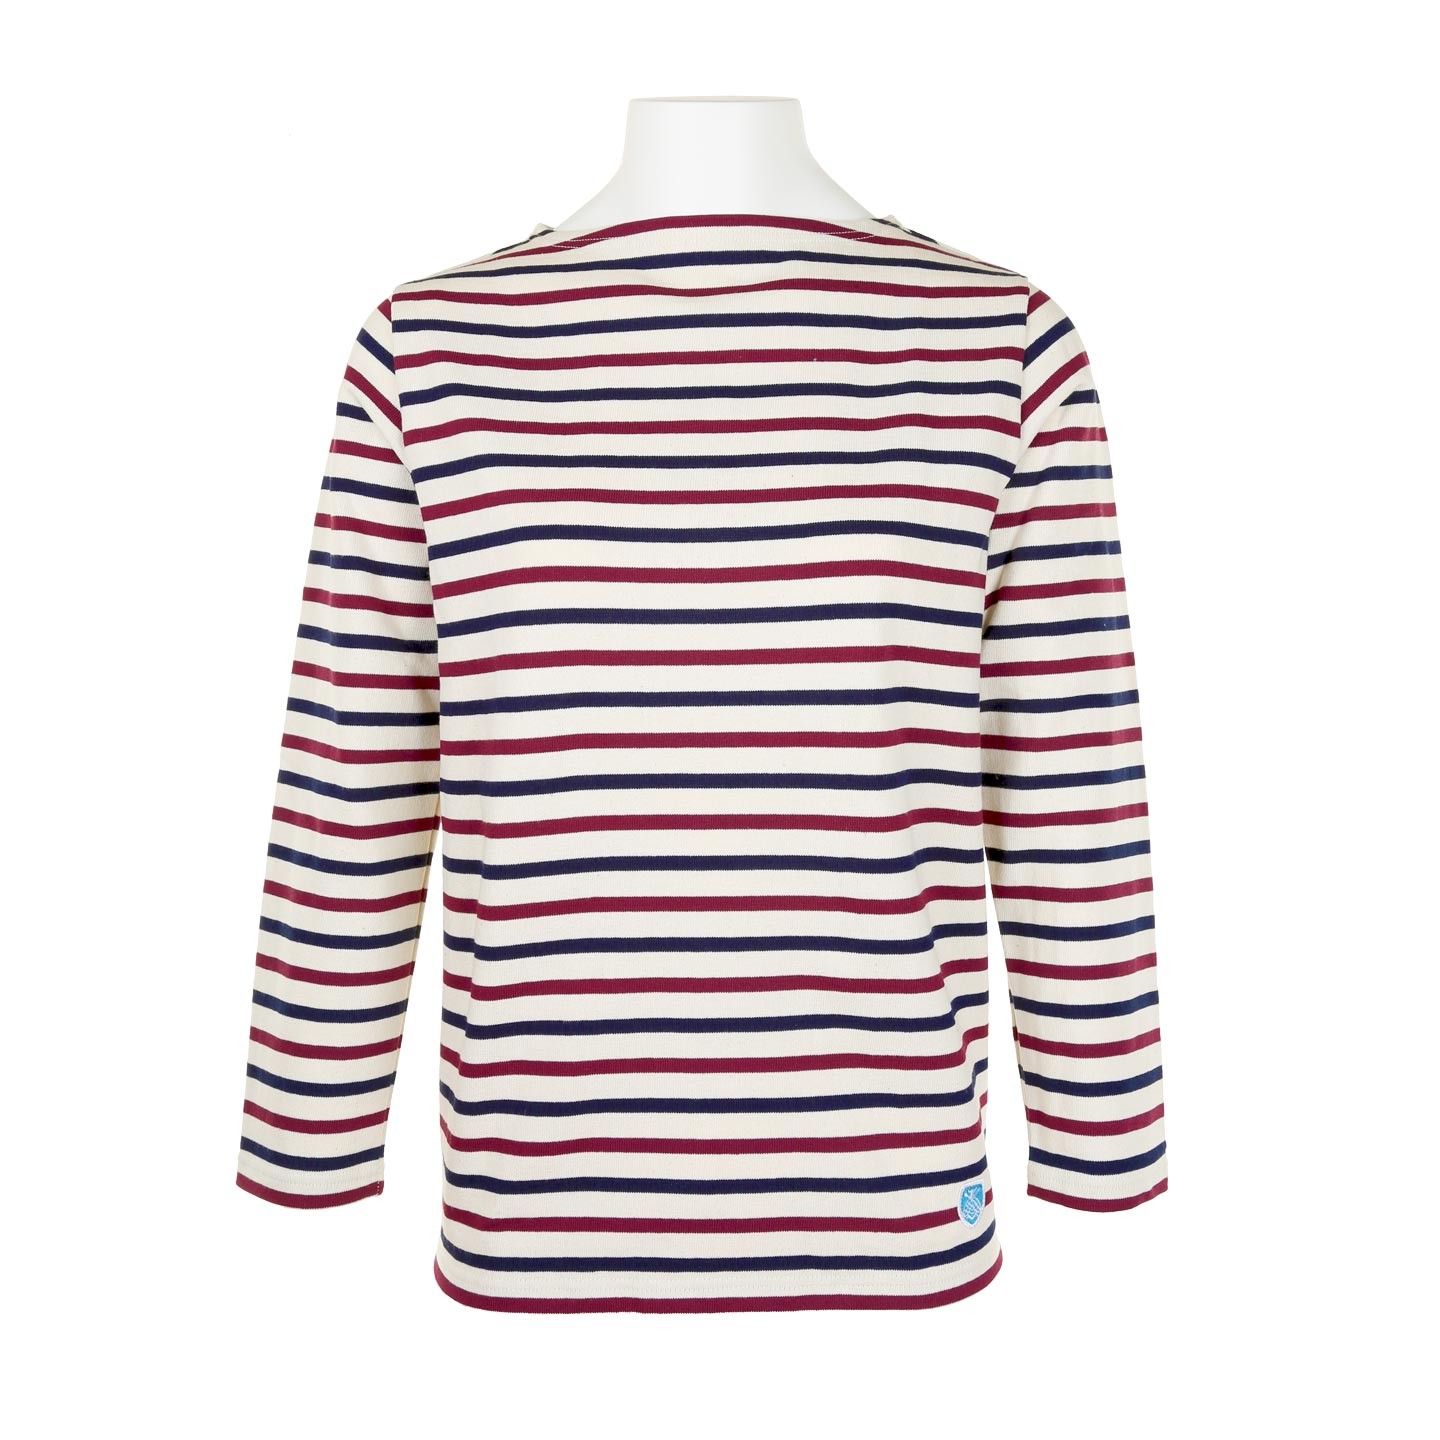 Striped shirt Ecru / Navy / Red, unisex made in France Orcival